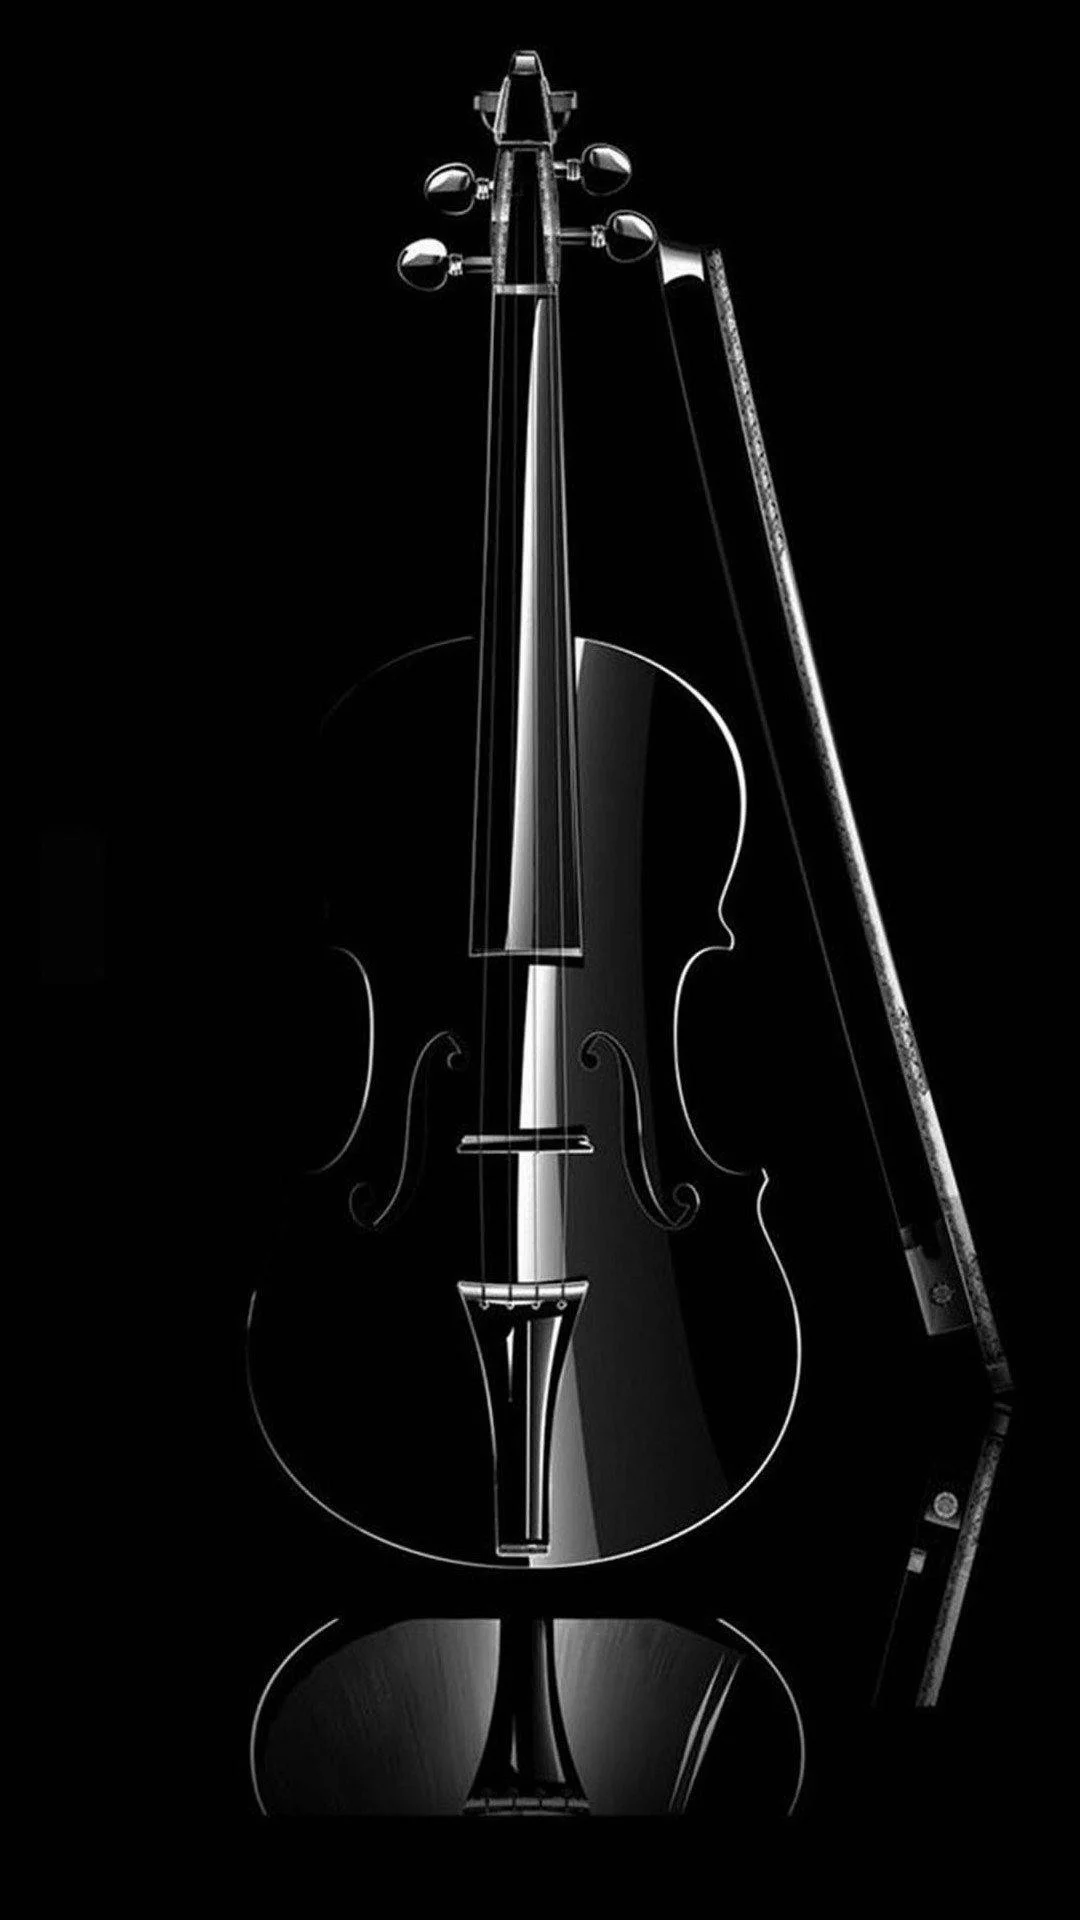 best wallpaper for android music smartphone-classical-music